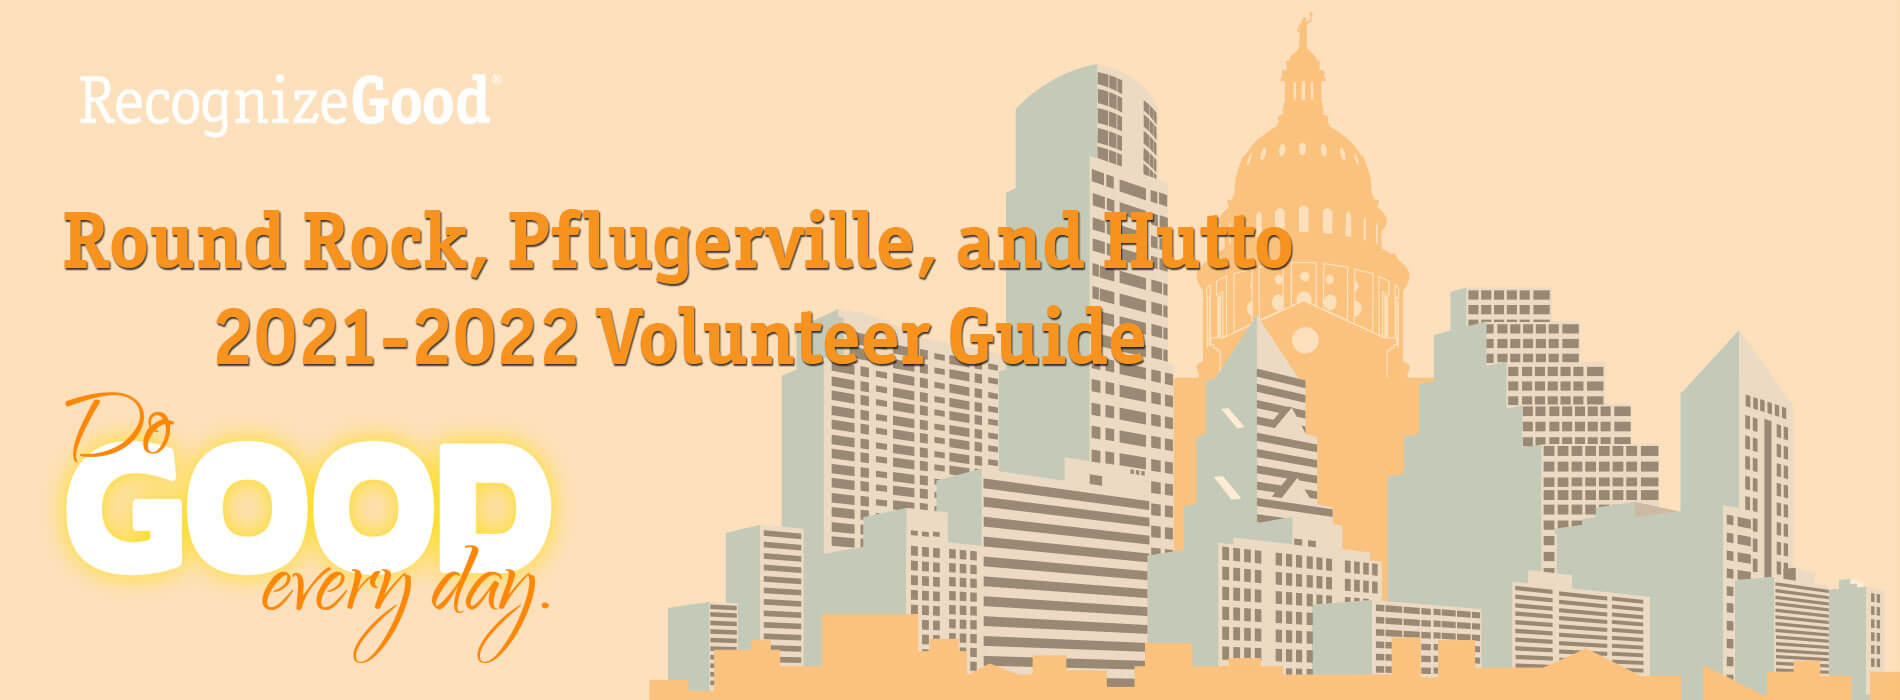 From animal assistance to community building: A 2021-22 volunteer guide for Round Rock, Pflugerville and Hutto